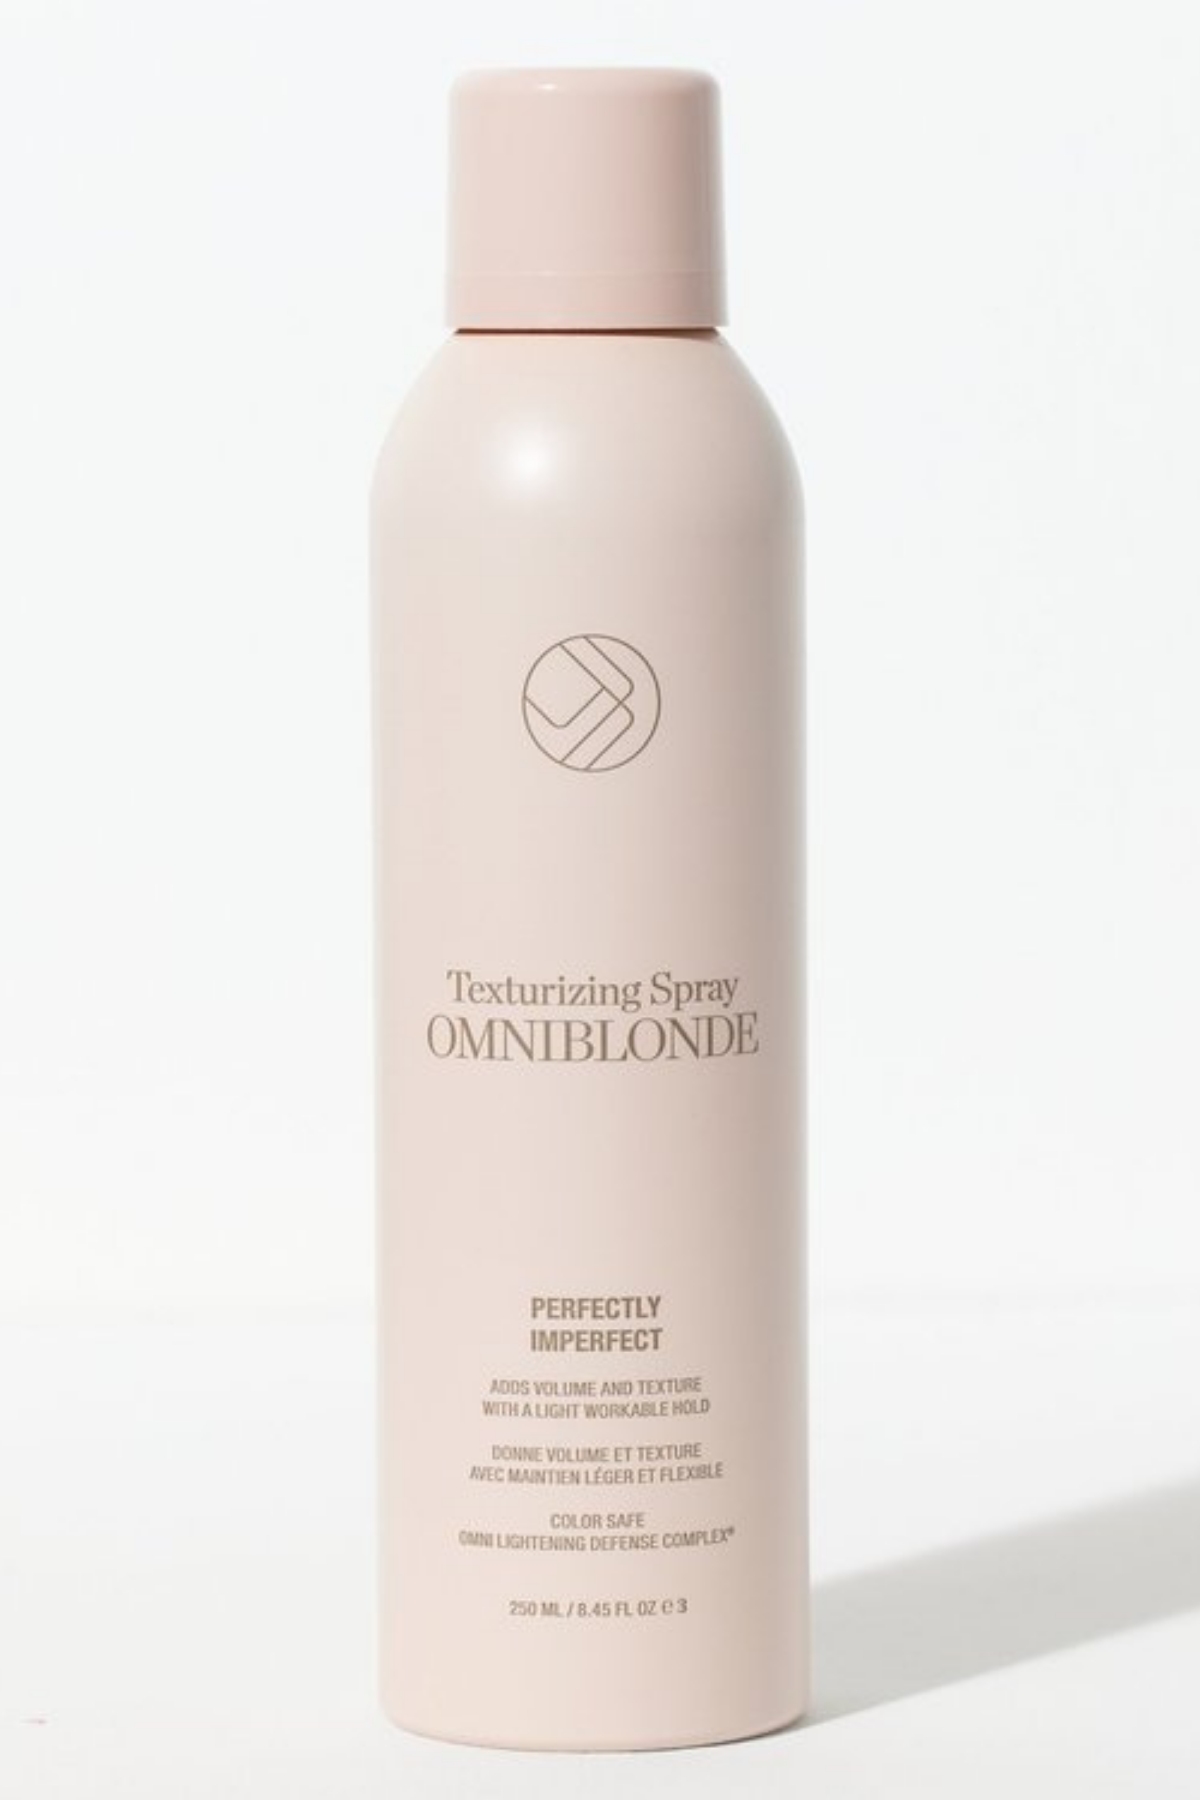 Omniblonde Texturizing Spray- Perfectly imperfect